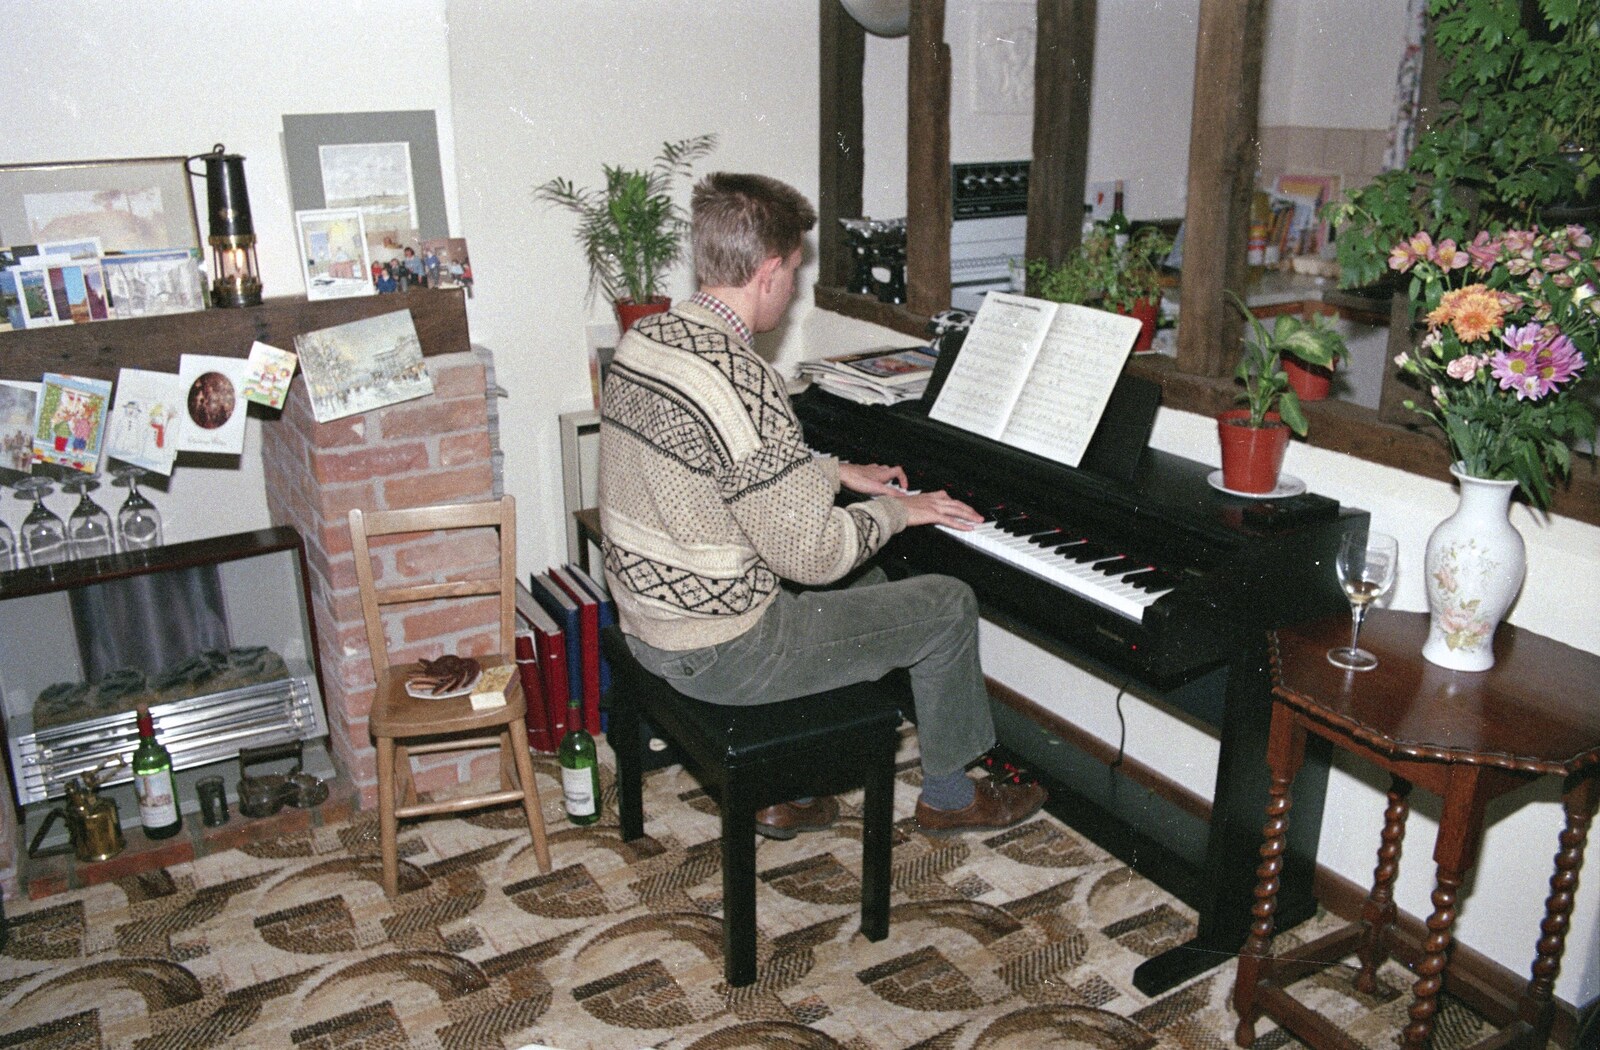 Nosher on piano from Carol Singing and Late Night Shopping, Stuston, Diss and Harleston, Norfolk - 16th December 1990